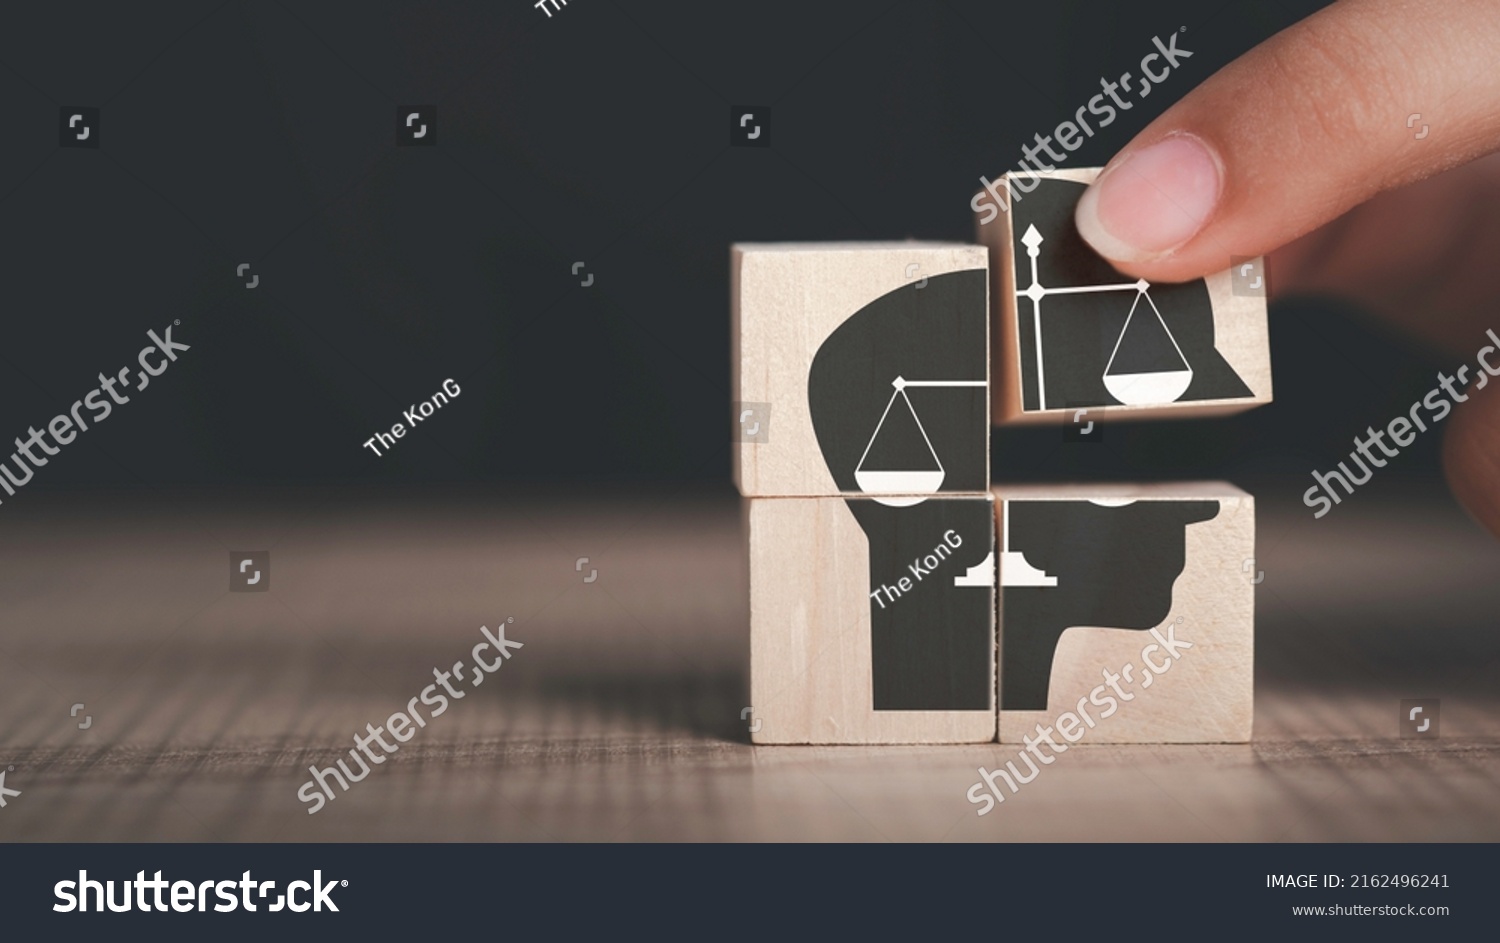 Ethics inside human mind, Business ethics concept. Hand hold ethics inside a head symbols in wooden cubes on dark background with copy space. #2162496241